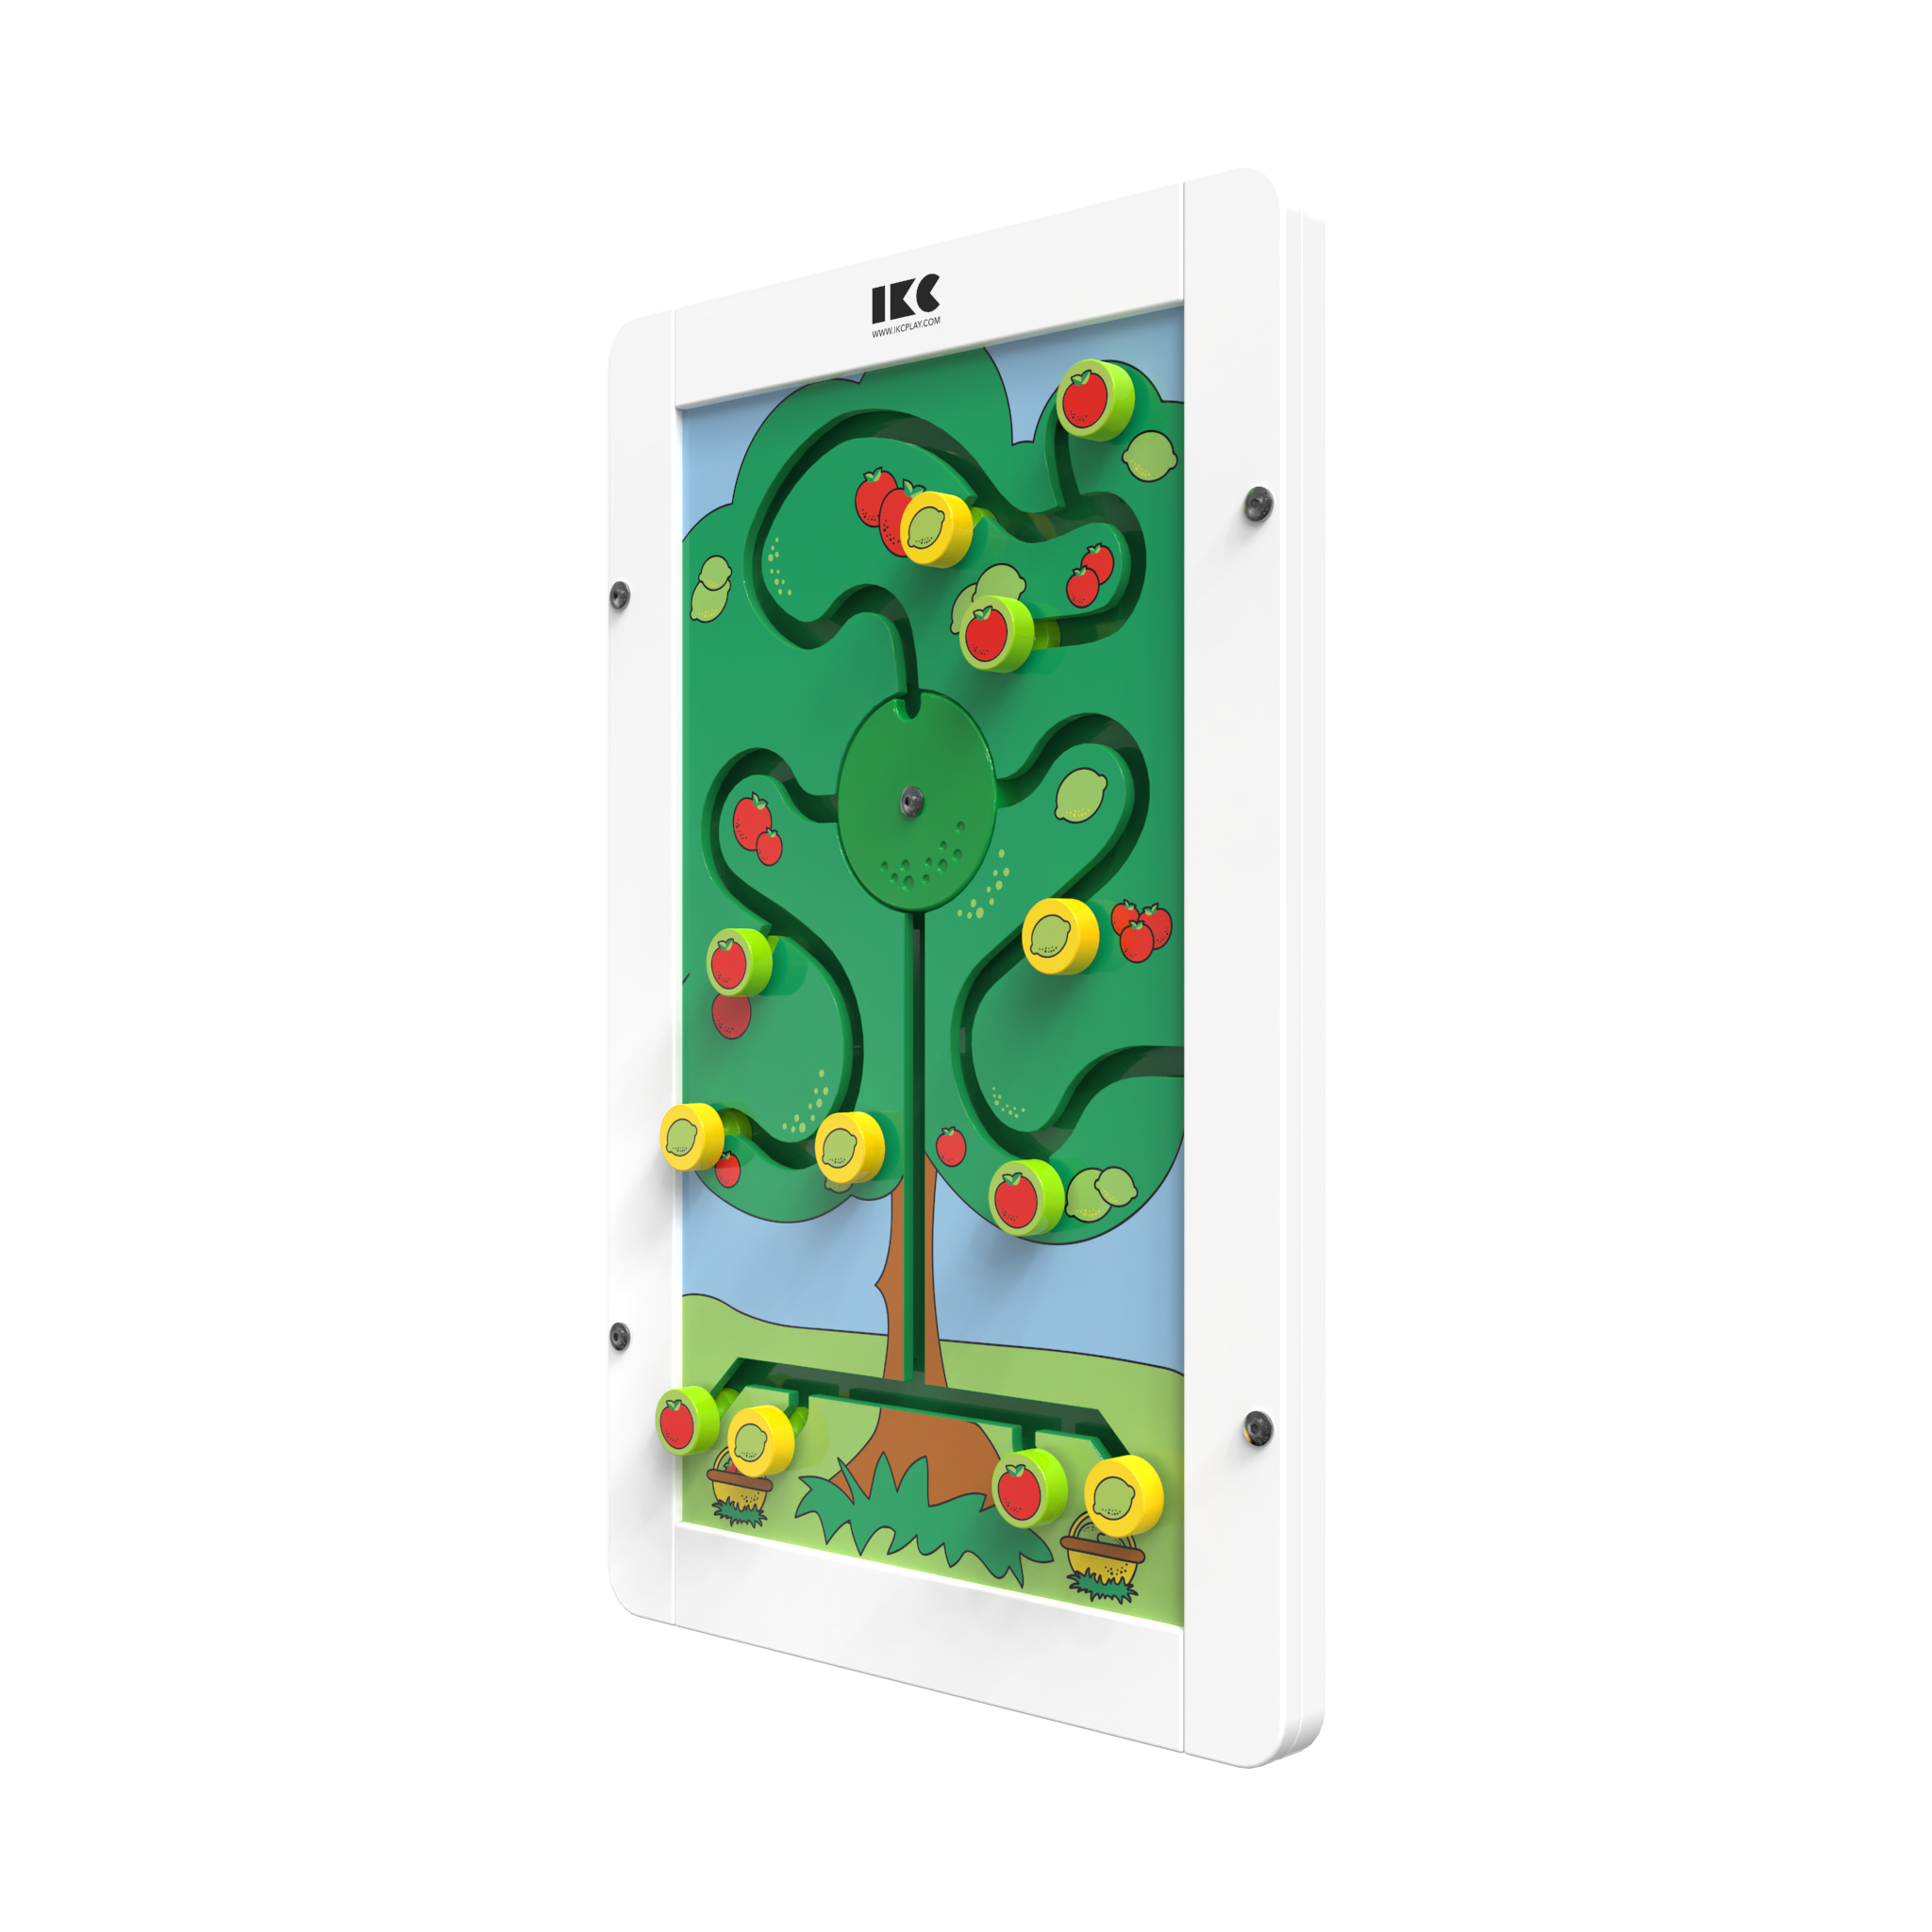 This image shows a wall game Sorting tree